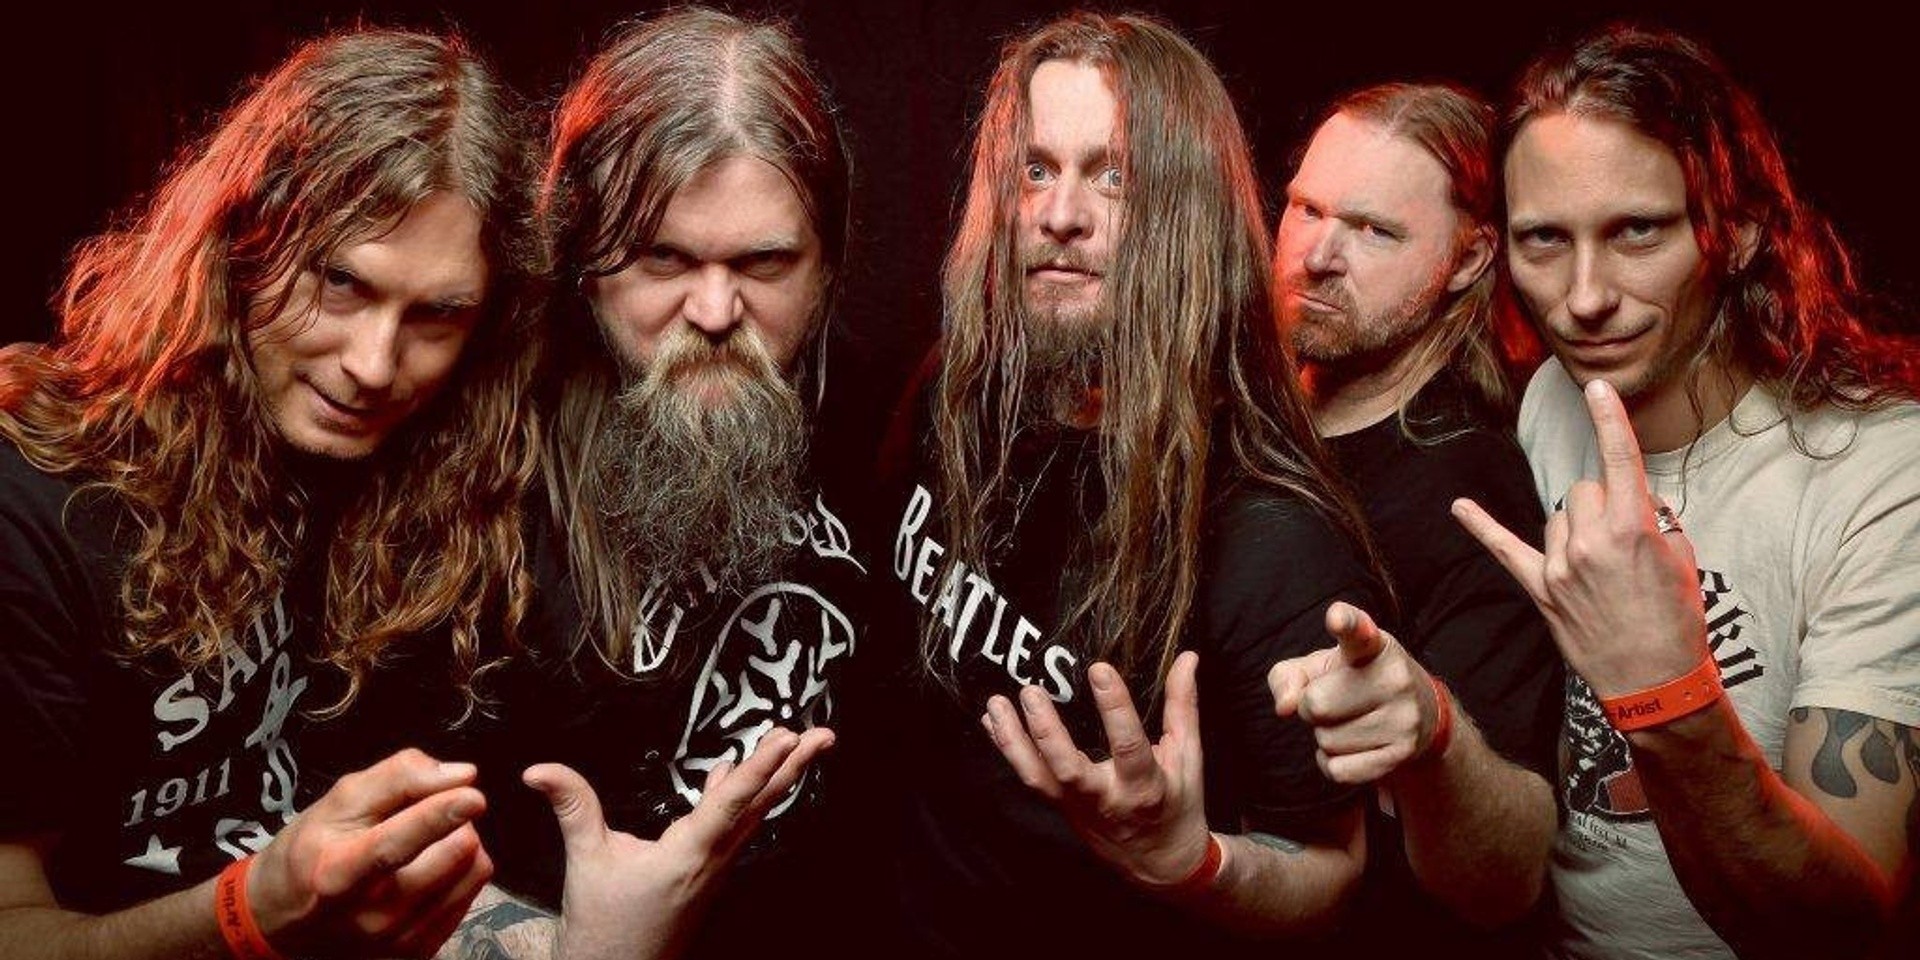 Norwegian extreme metal band Enslaved to perform in Singapore for the first time